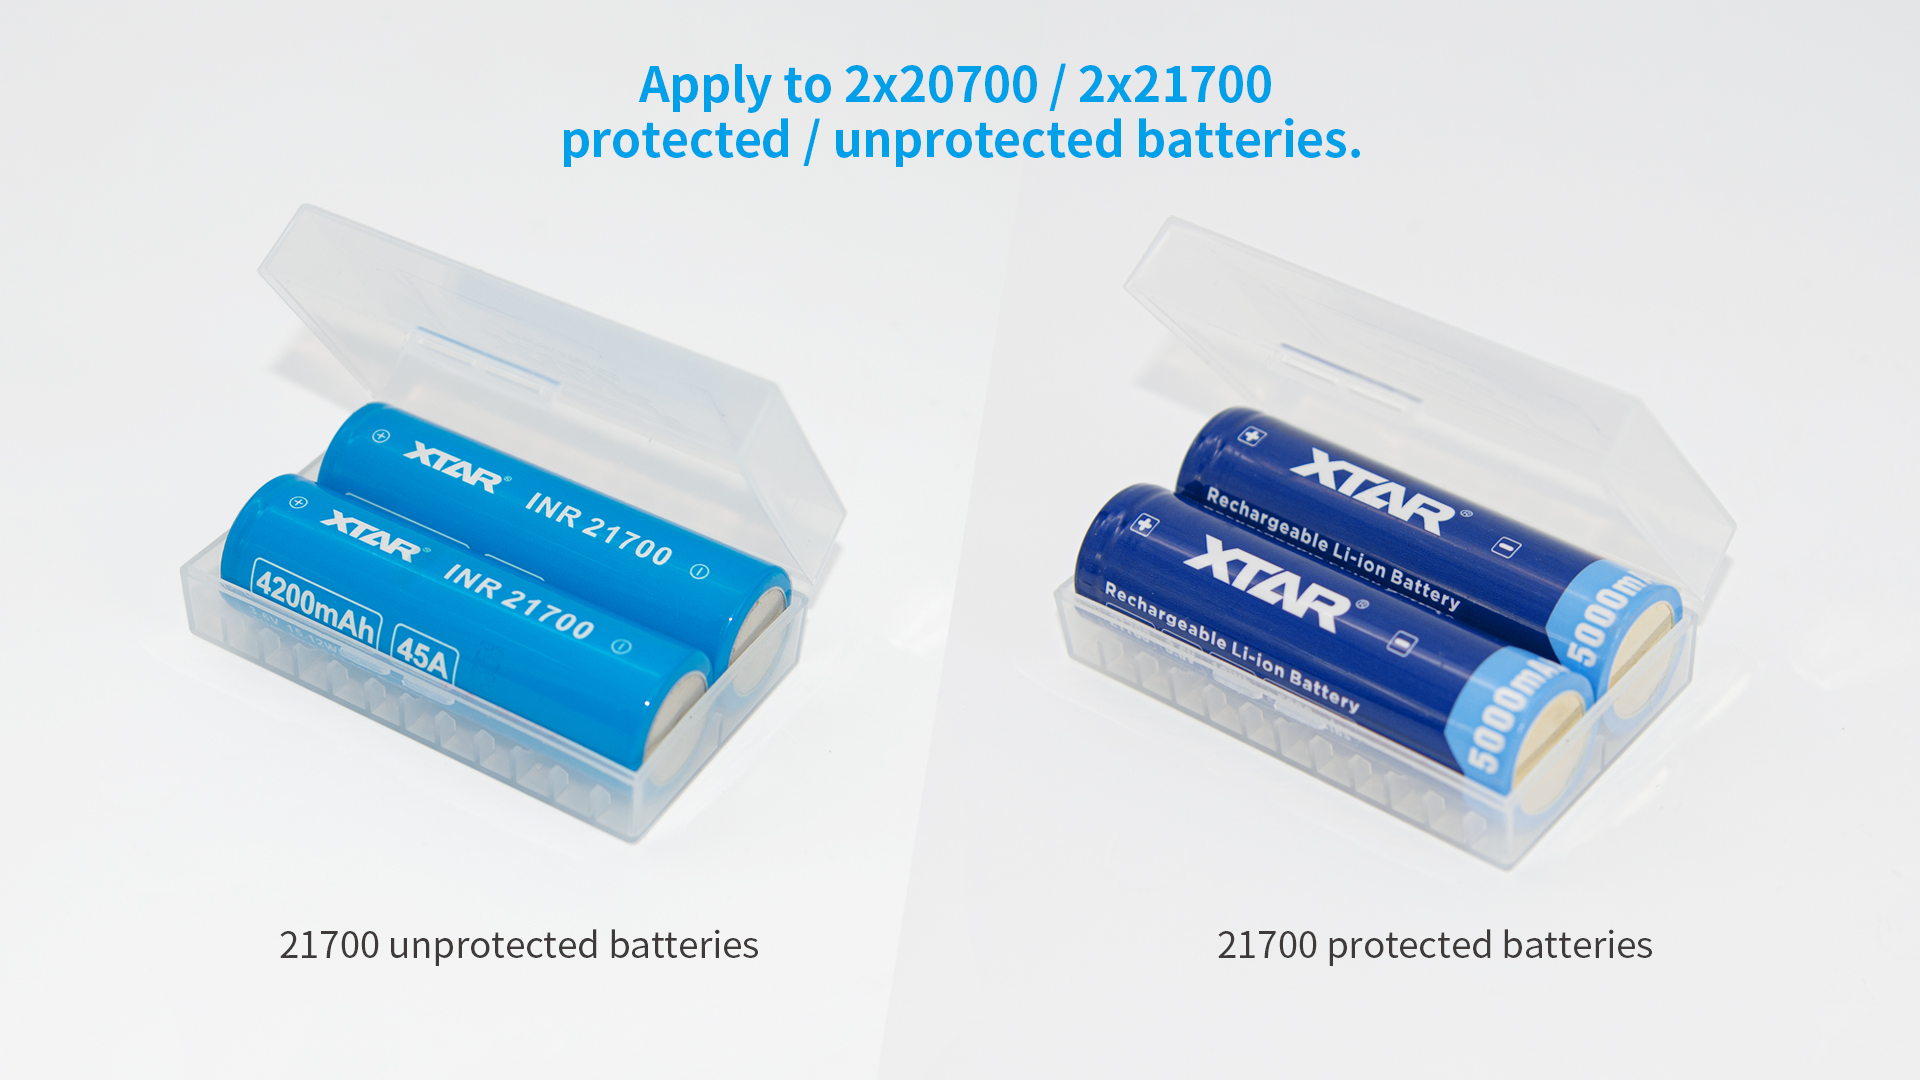 Apply to 2x21700/20700 protected/unprotected batteries